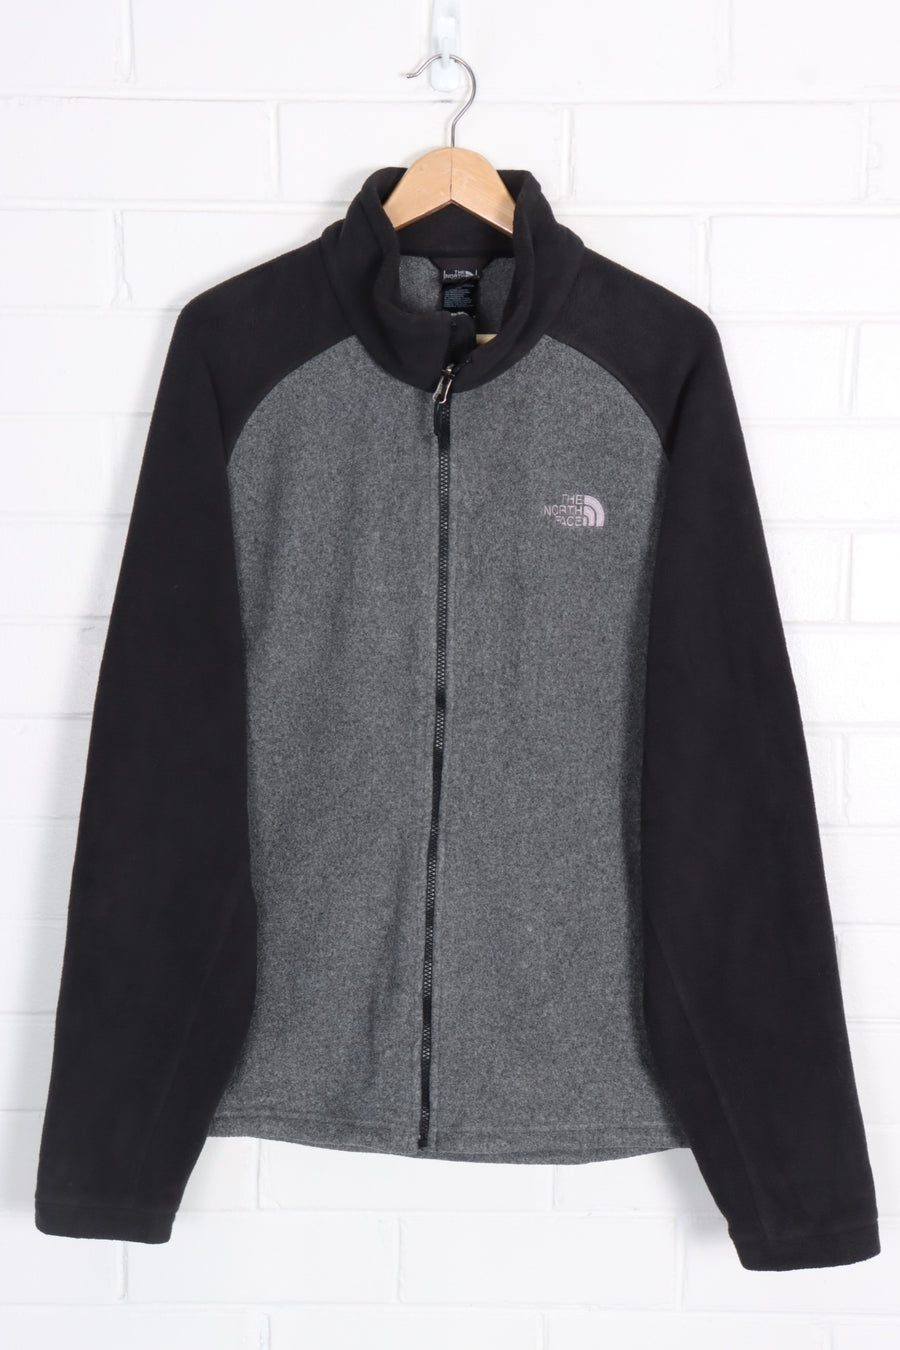 THE NORTH FACE Two Tone Grey Zip Up Fleece (XL)